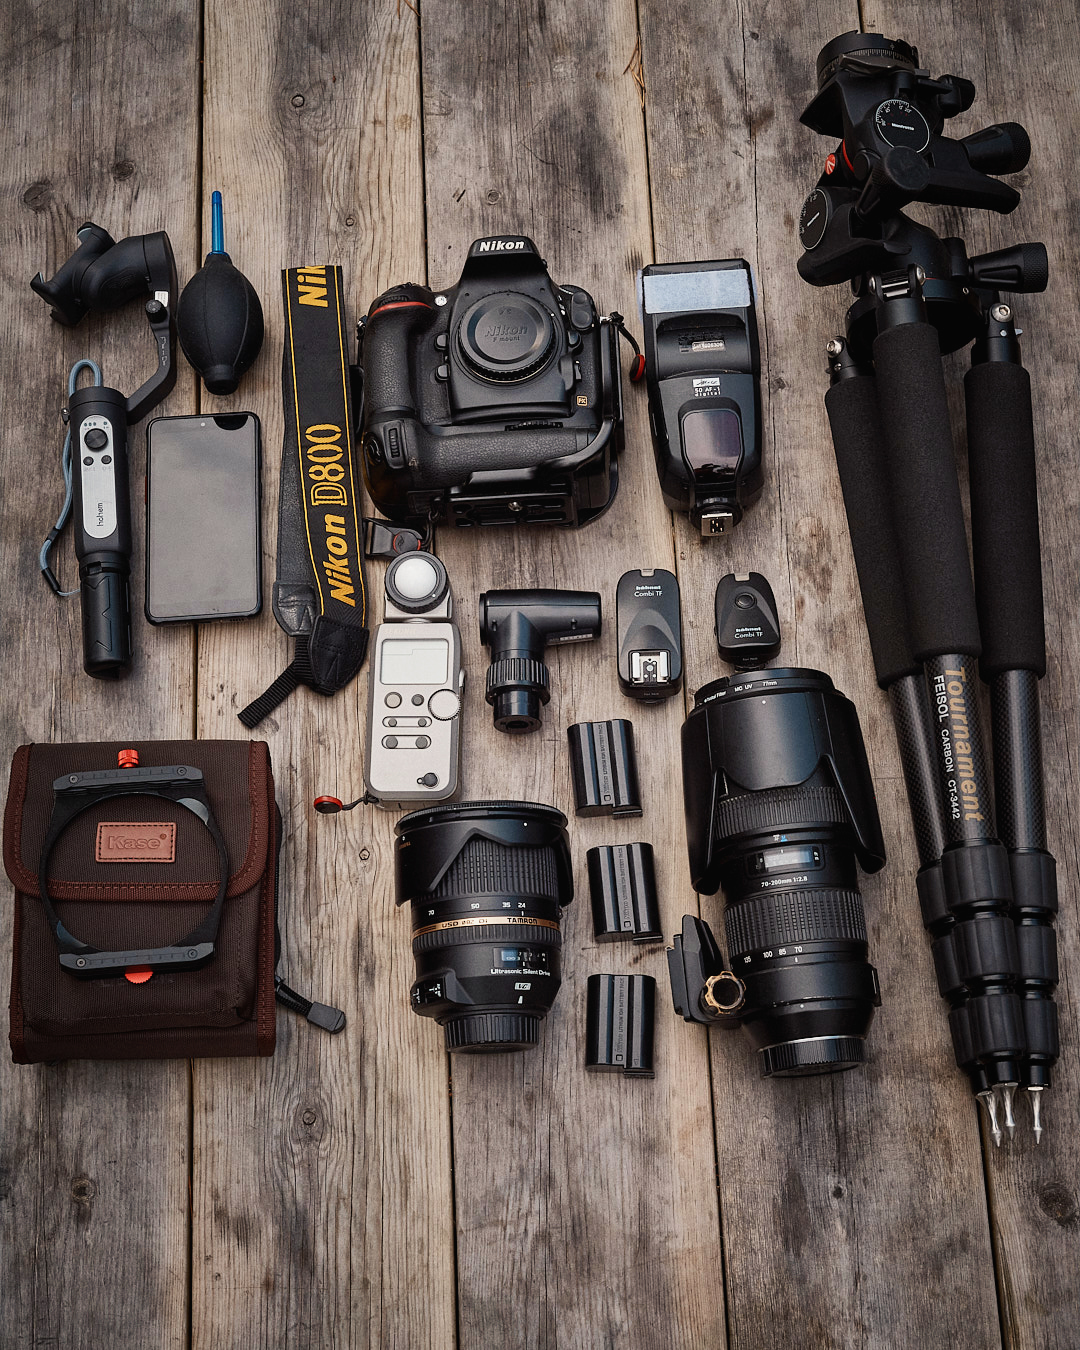 The gear I use regularly. My main camera is a Nikon D800 (with a Nikon MB-12D). As my goto lens I use the Tamron SP 24-70mm f2.8.